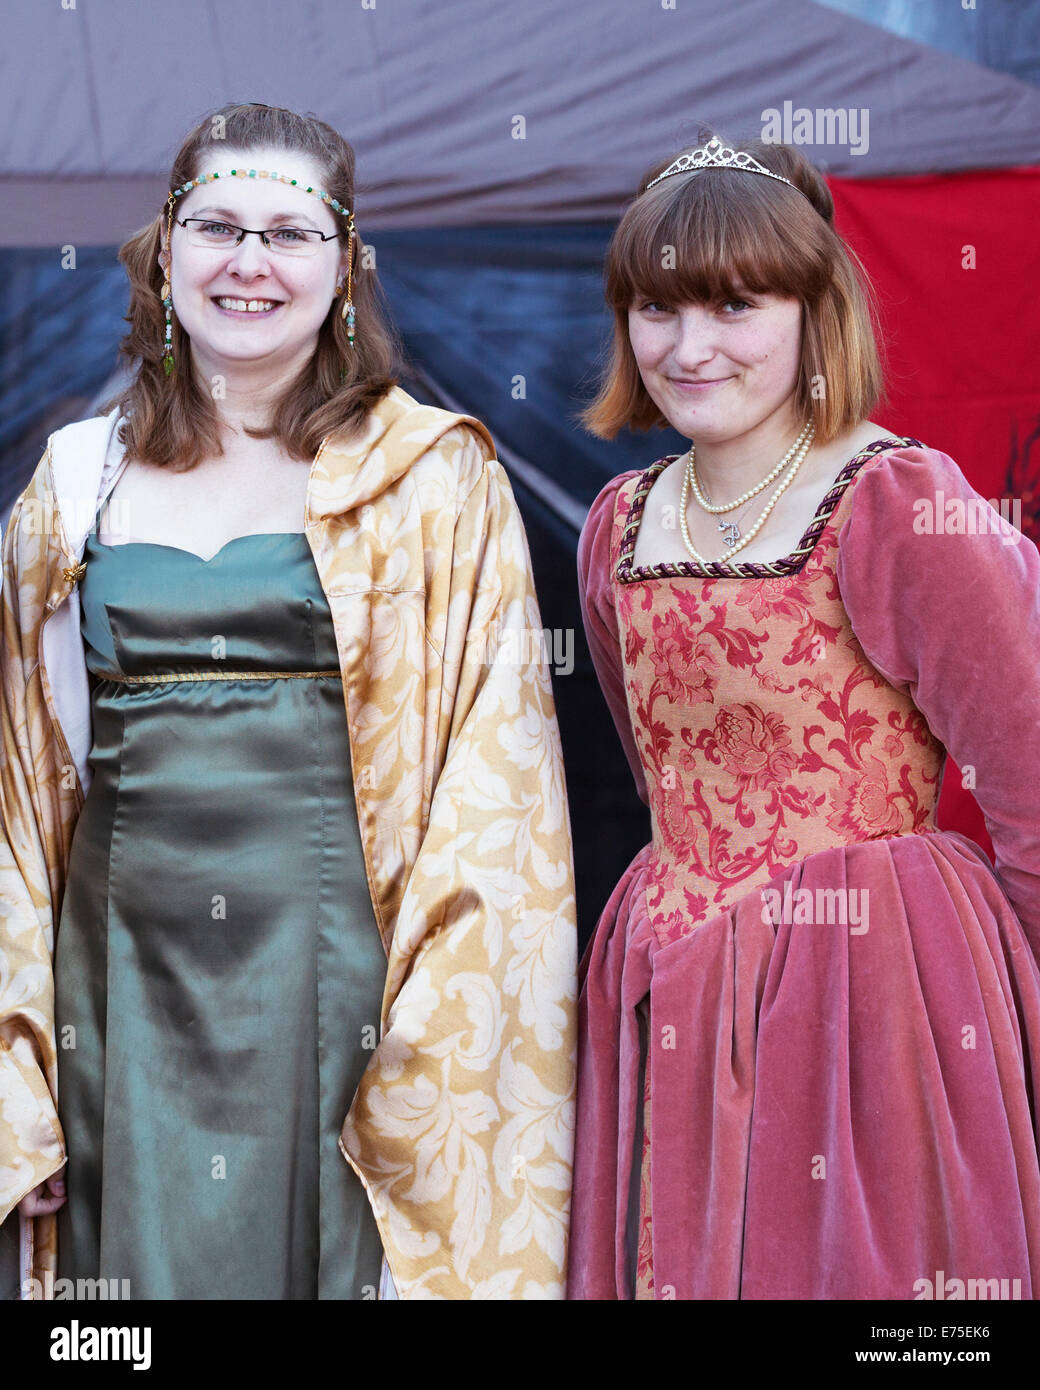 Calgary, Canada. 7th September, 2014.  Members of the live action role-playing group Alliance Alberta attend the inaugural Princess Prance at Eau Claire Market. The event raised funds for the Children's Wish Foundation to help grant wishes to children with life threatening illnesses. Credit:  Rosanne Tackaberry/Alamy Live News Stock Photo